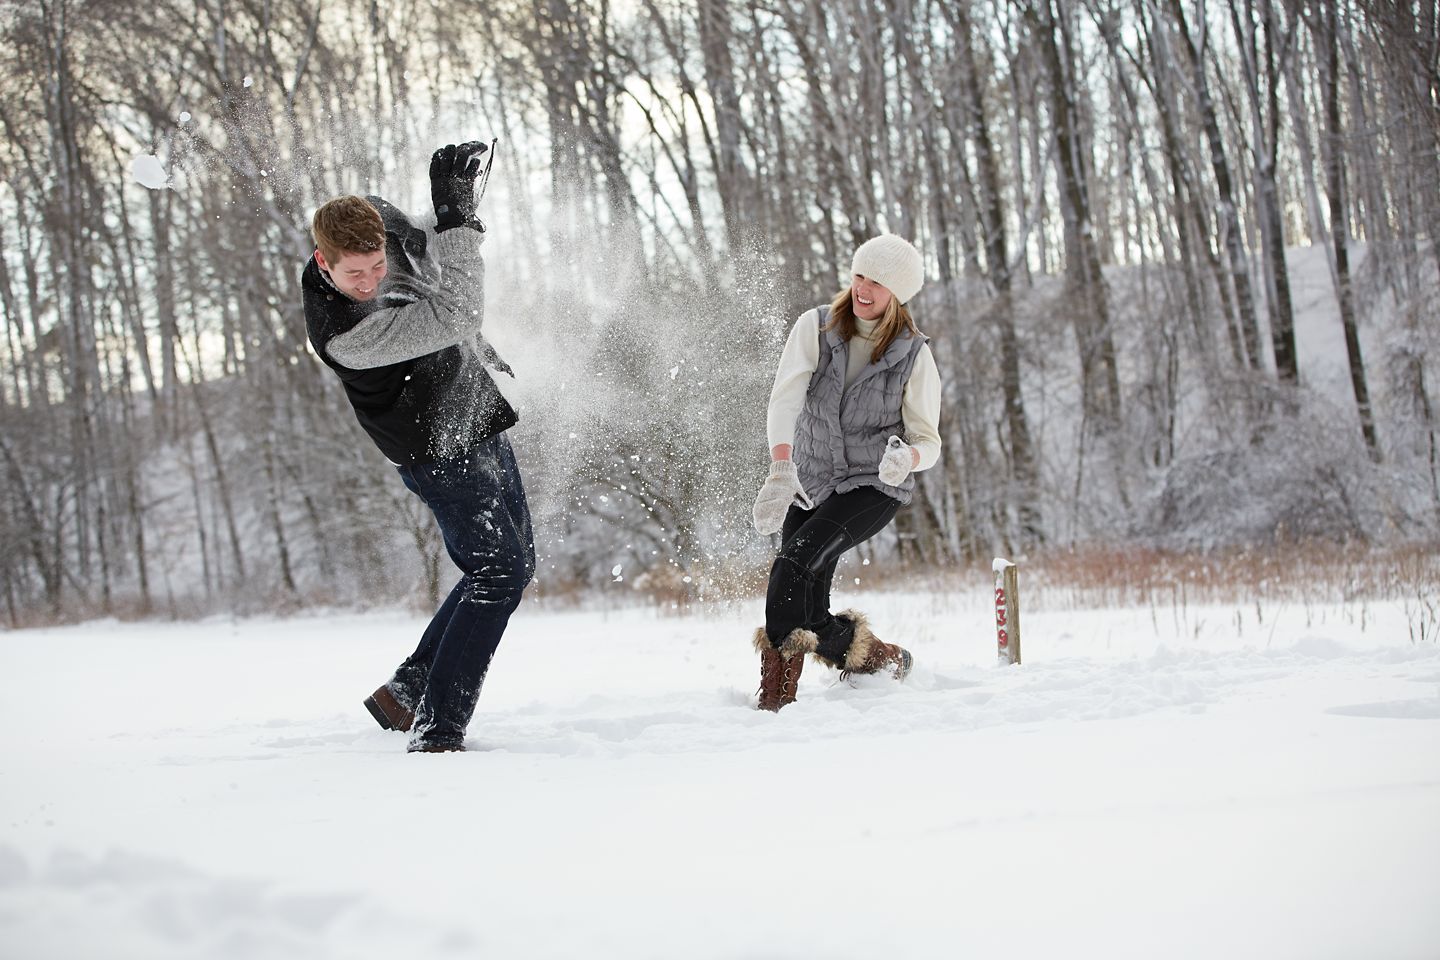 a woman man having a snow fight with the woman throwing snow in the man's face